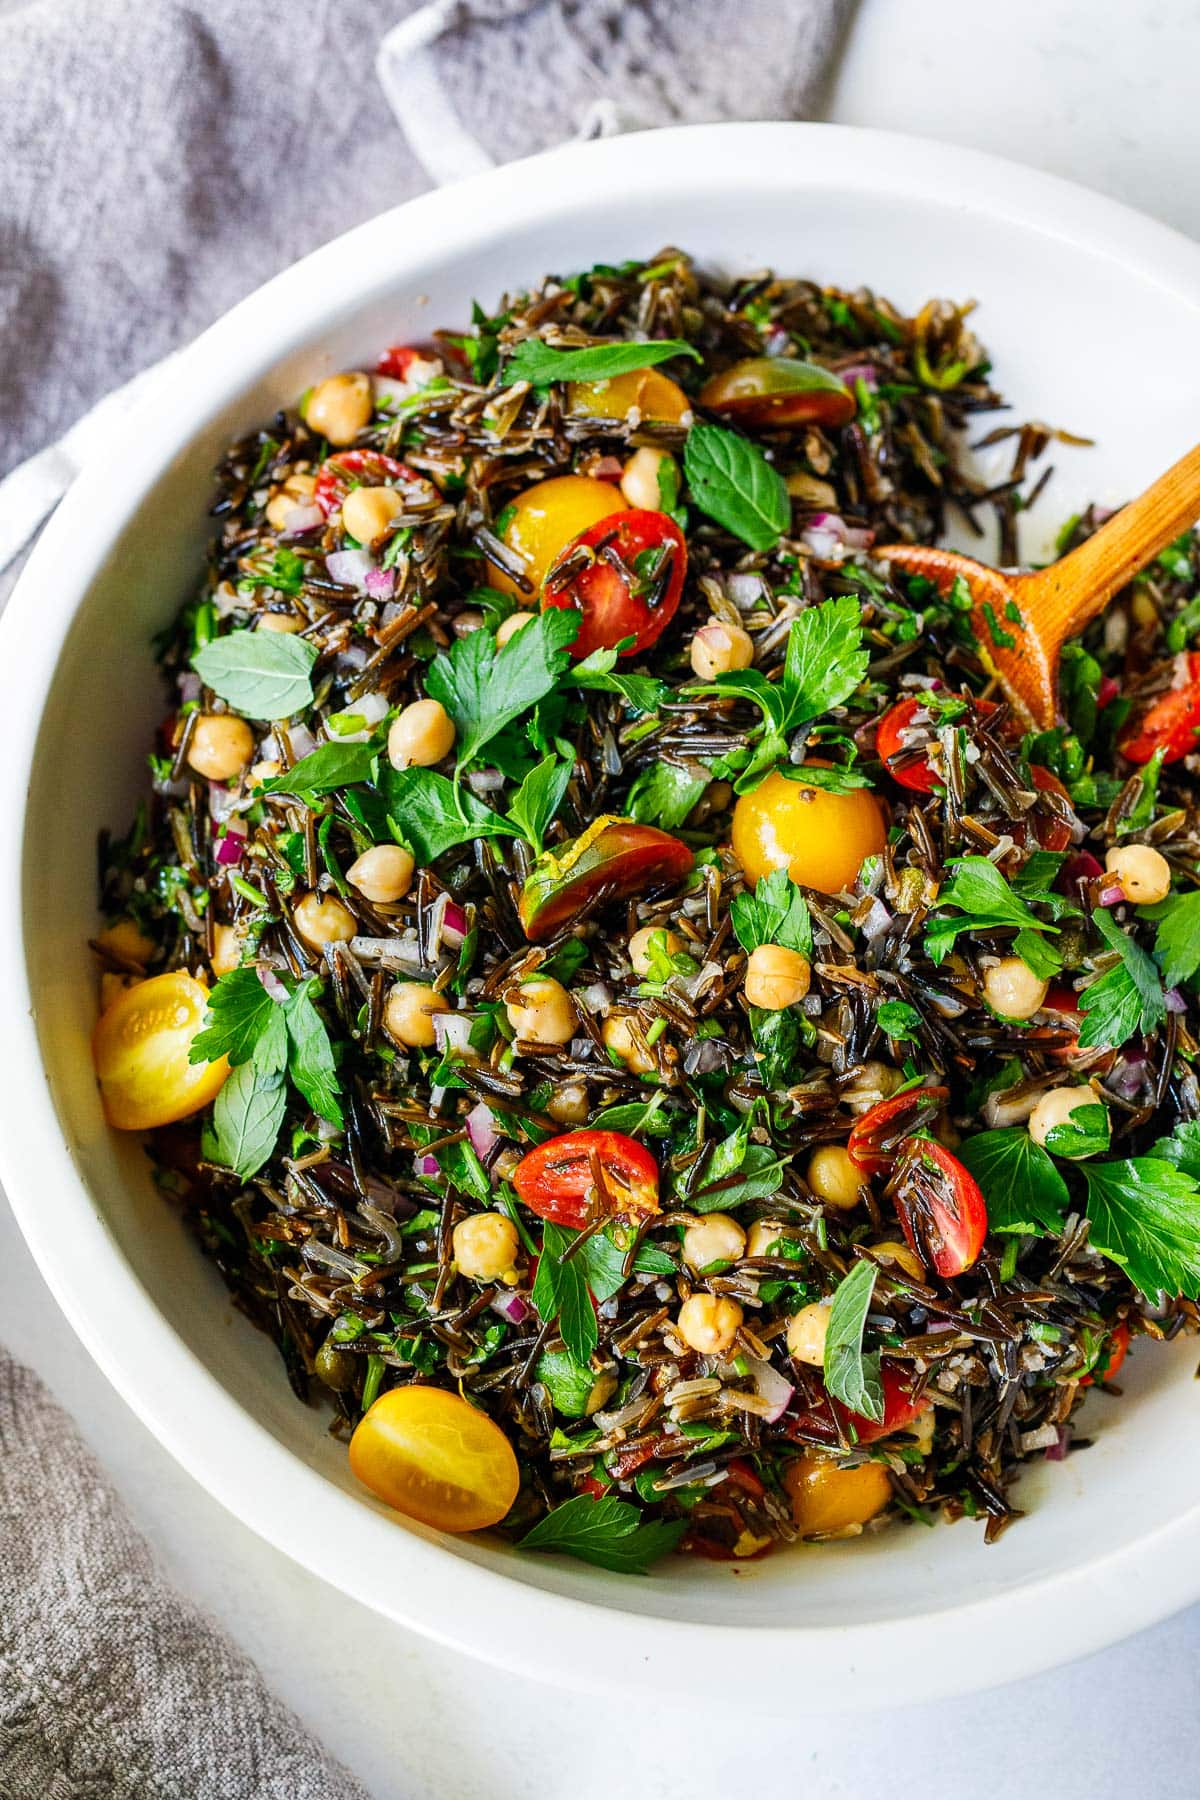 Wild rice salad with cherry tomatoes, chickpeas, and fresh herbs.